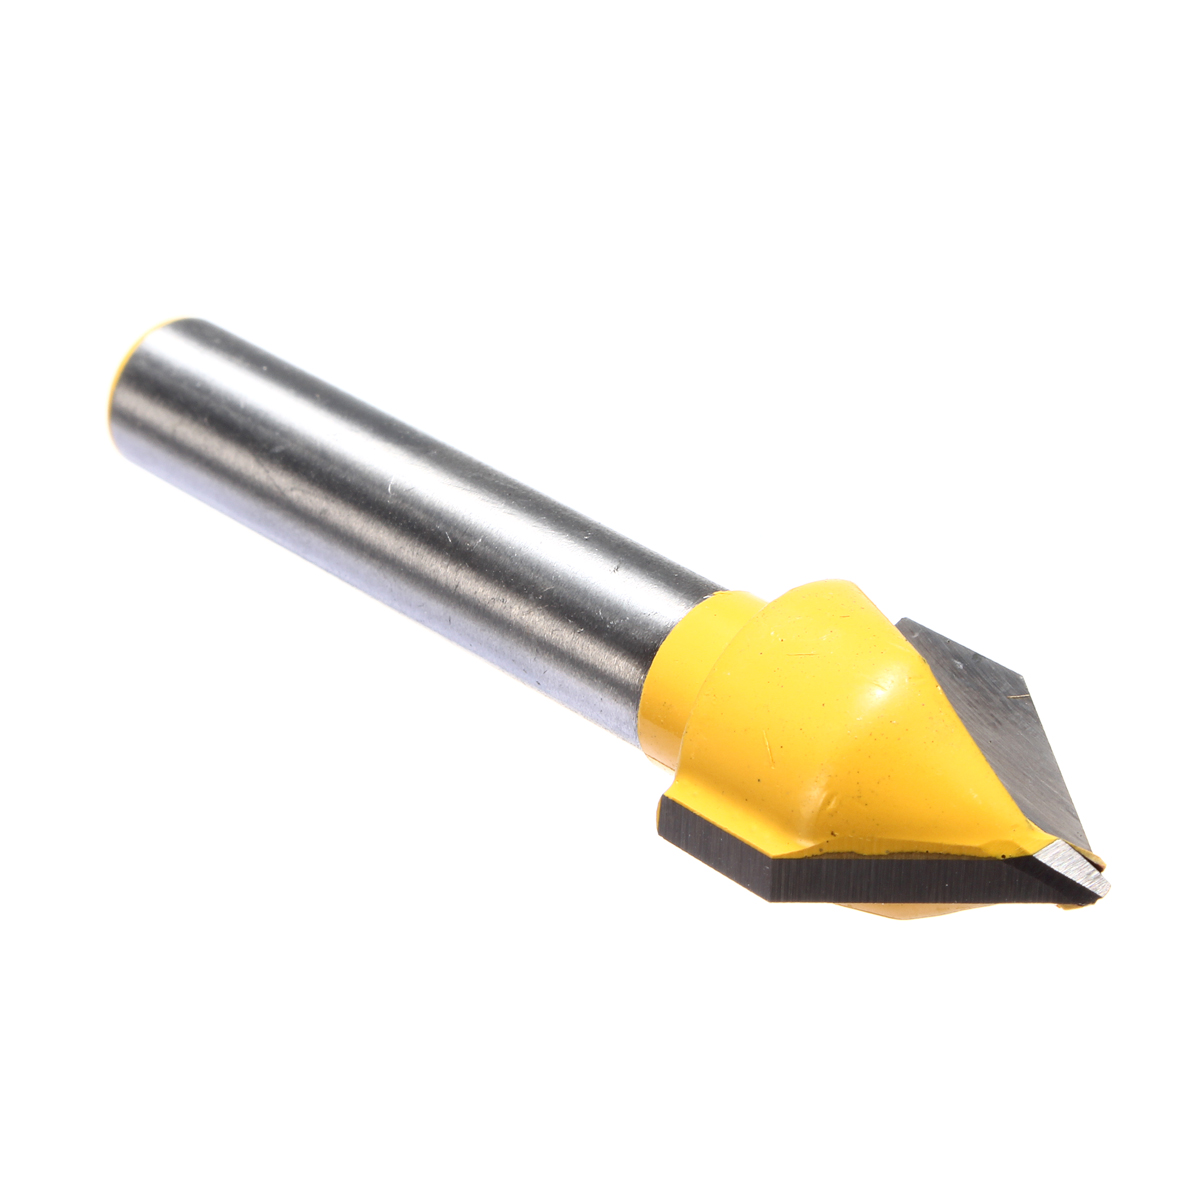 14-Inch-Shank-60-Degree-V-Groove-Router-Bit-Carbide-Tipped-Hardwood-Cutting-Cutter-1291376-4